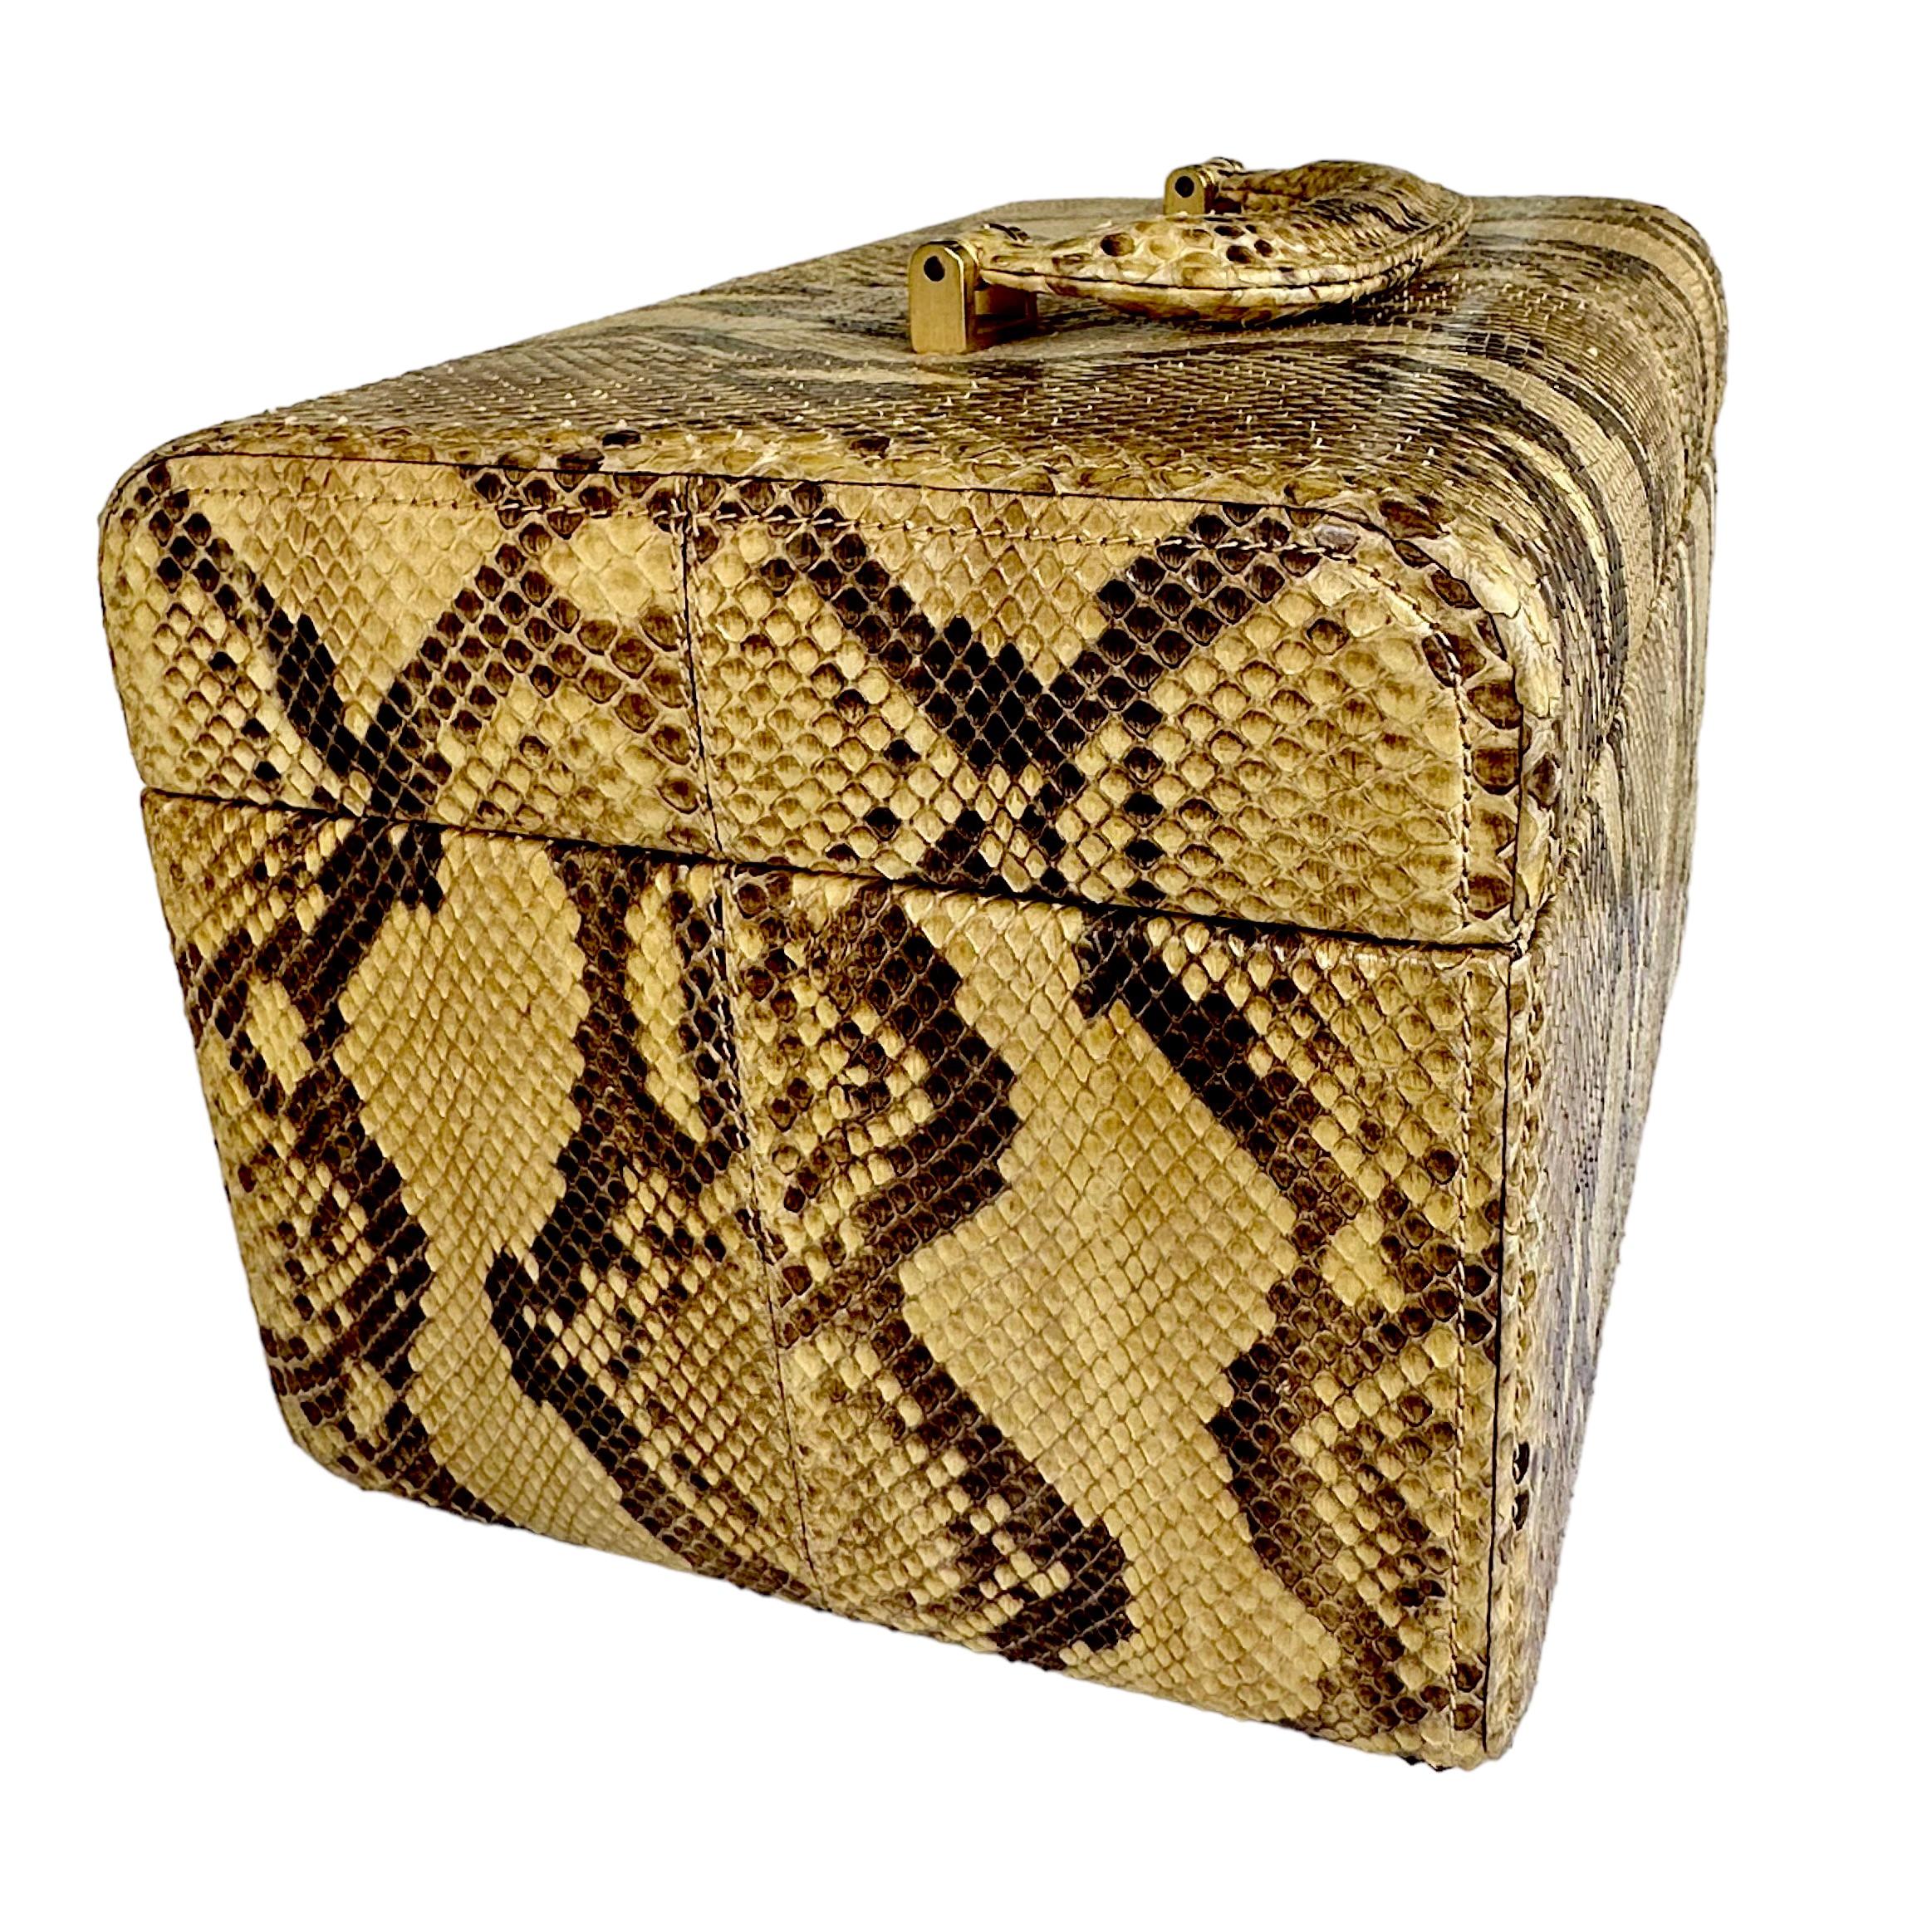 Women's Pineider Reptile Skin Covered Travel Beauty Case and Companion Jewelry Case For Sale